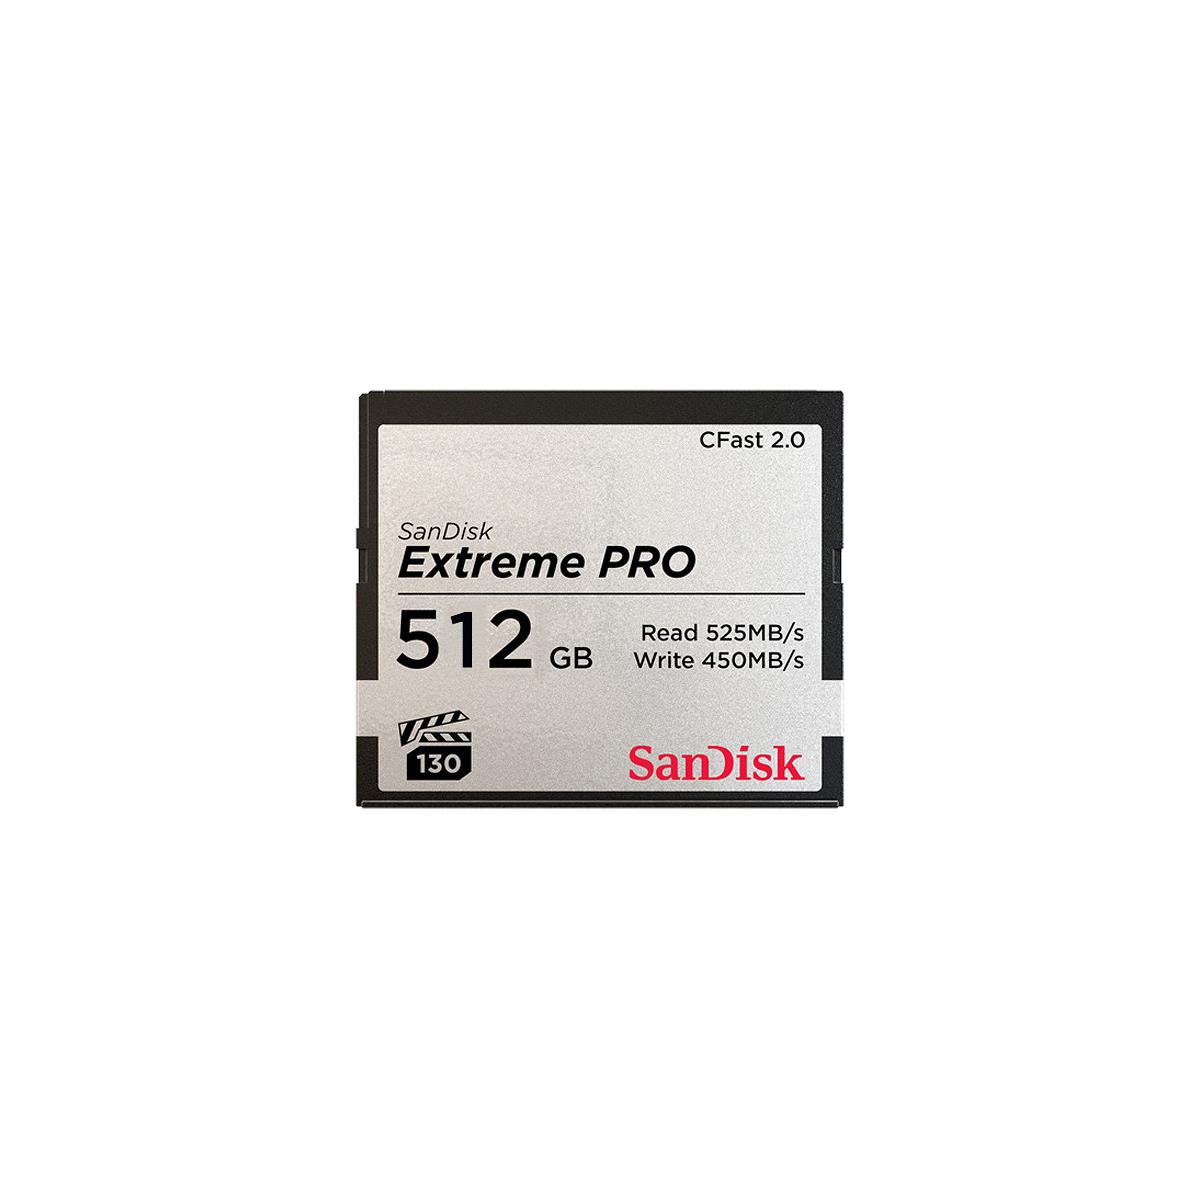 Image of SanDisk Extreme PRO 512GB CFast 2.0 Memory Card